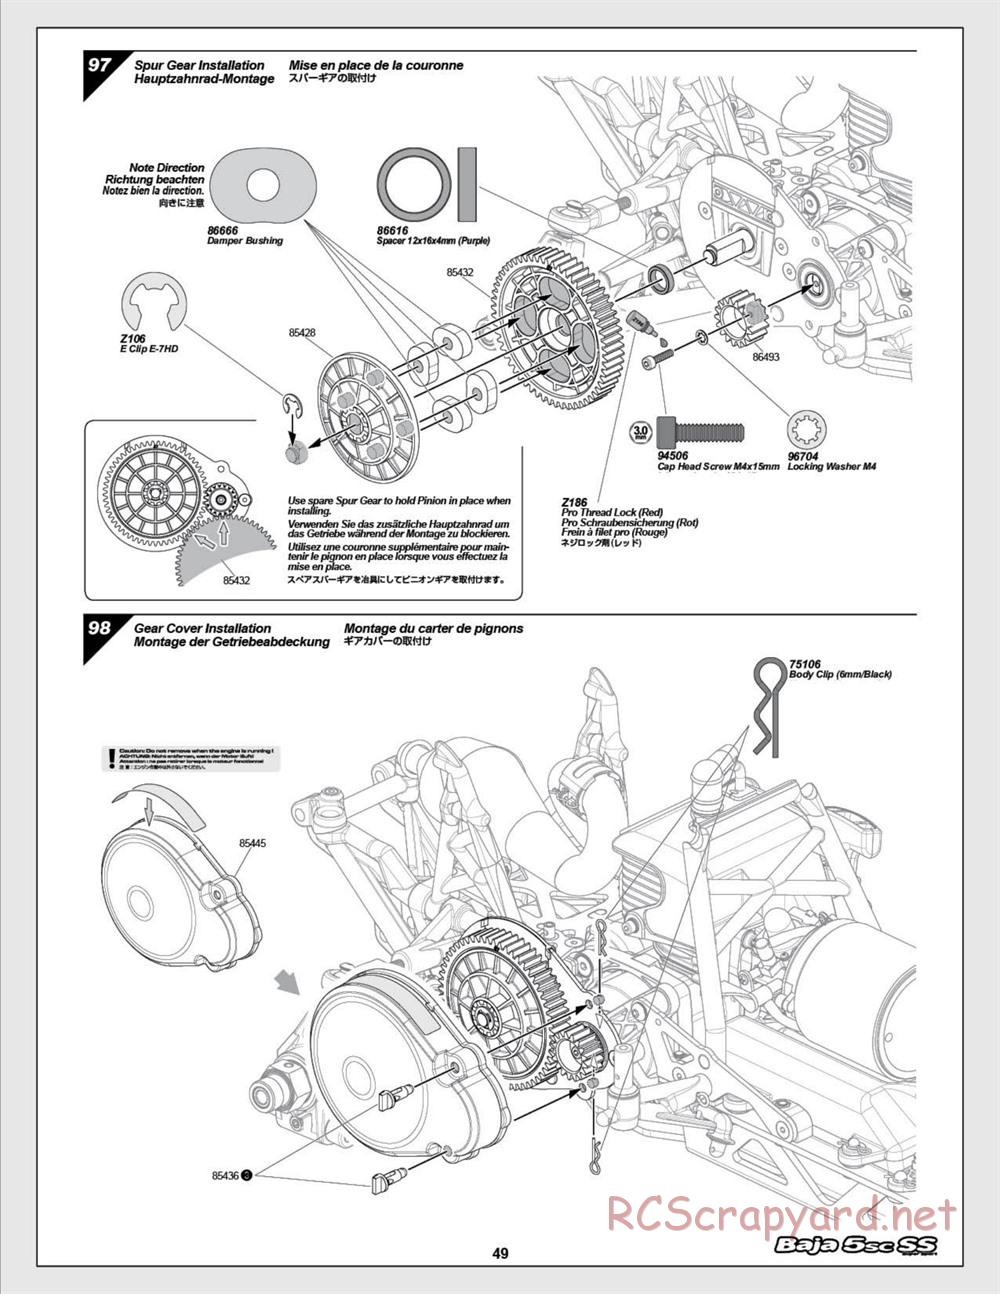 HPI - Baja 5SC SS - Exploded View - Page 49